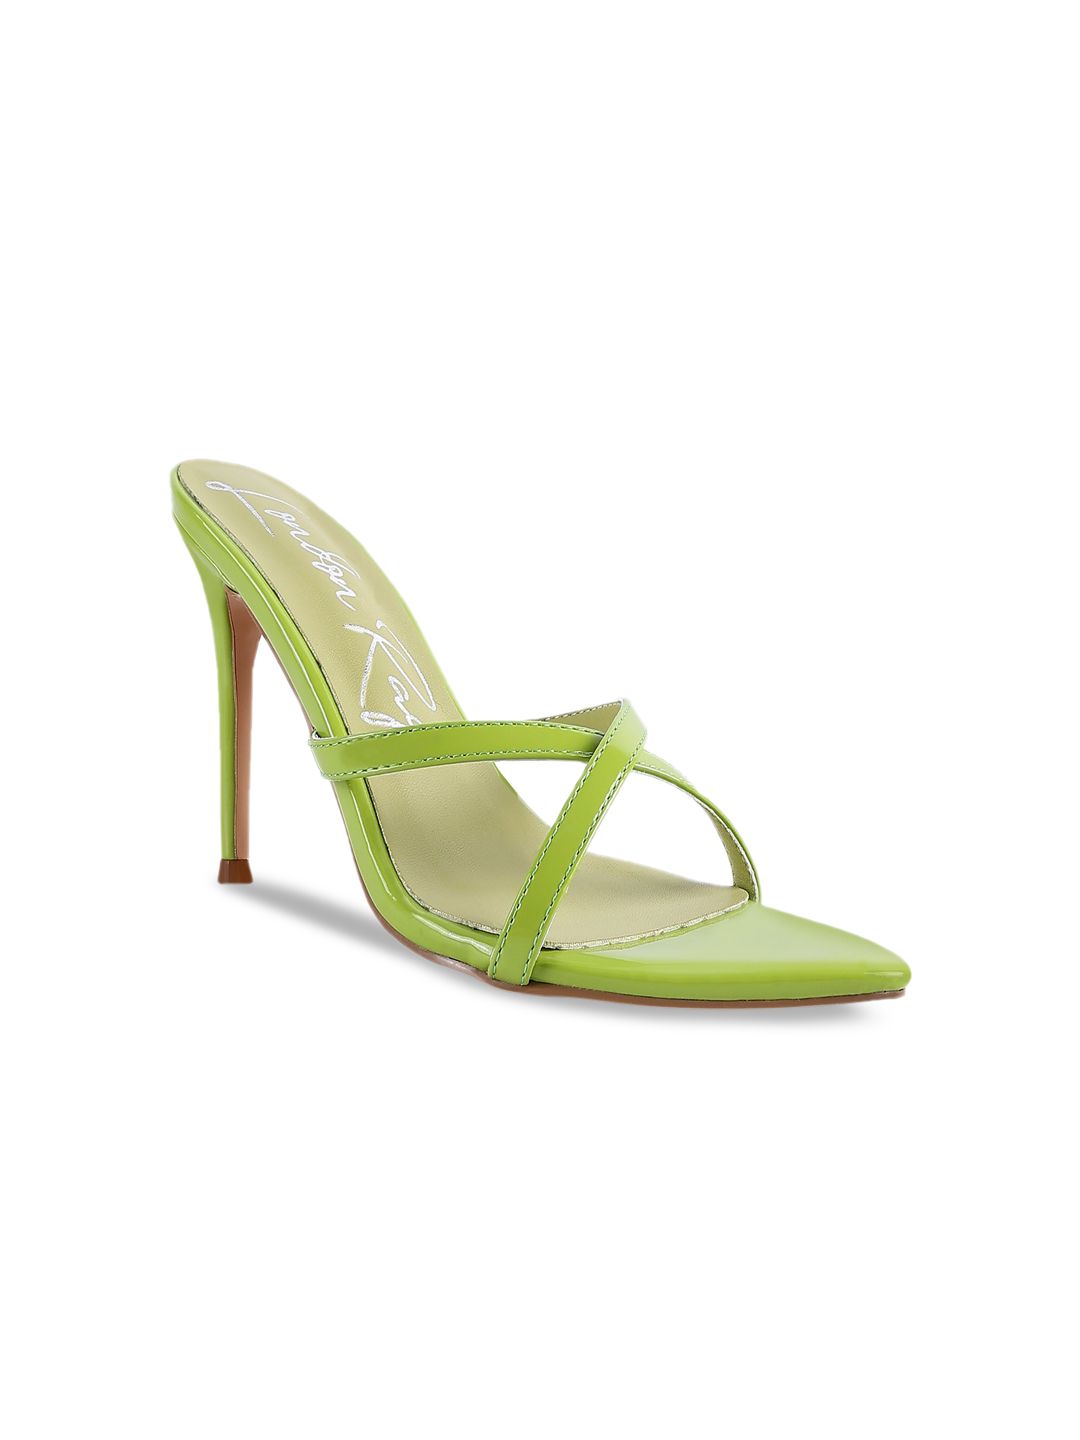 London Rag Green PU Party Stiletto Sandals Price in India